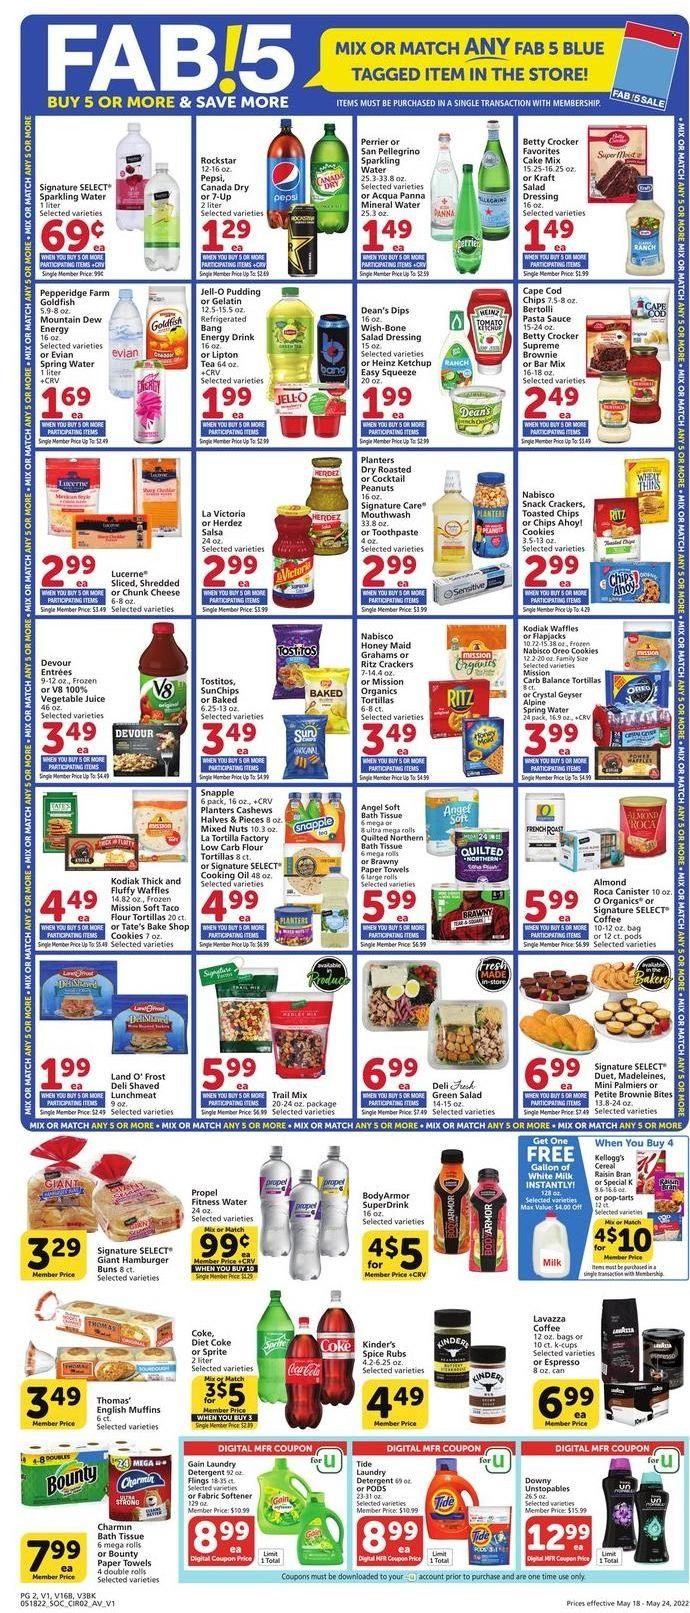 thumbnail - Vons Flyer - 05/18/2022 - 05/24/2022 - Sales products - english muffins, tortillas, buns, burger buns, flour tortillas, brownies, waffles, cake mix, cod, pasta sauce, sauce, Kraft®, Bertolli, lunch meat, chunk cheese, pudding, Oreo, milk, Devour, cookies, snack, Bounty, crackers, Kellogg's, Pop-Tarts, Chips Ahoy!, RITZ, Thins, Goldfish, Tostitos, Jell-O, Heinz, cereals, Raisin Bran, Honey Maid, rice, spice, salad dressing, ketchup, dressing, salsa, oil, cooking oil, cashews, peanuts, mixed nuts, Planters, trail mix, Canada Dry, Coca-Cola, Mountain Dew, Sprite, Pepsi, juice, energy drink, Lipton, Diet Coke, 7UP, Snapple, vegetable juice, Perrier, Rockstar, mineral water, spring water, sparkling water, Evian, San Pellegrino, tea, coffee, coffee capsules, K-Cups, Lavazza, bath tissue, Quilted Northern, kitchen towels, paper towels, Charmin, detergent, Gain, Tide, Unstopables, fabric softener, laundry detergent, toothpaste, mouthwash, canister. Page 2.